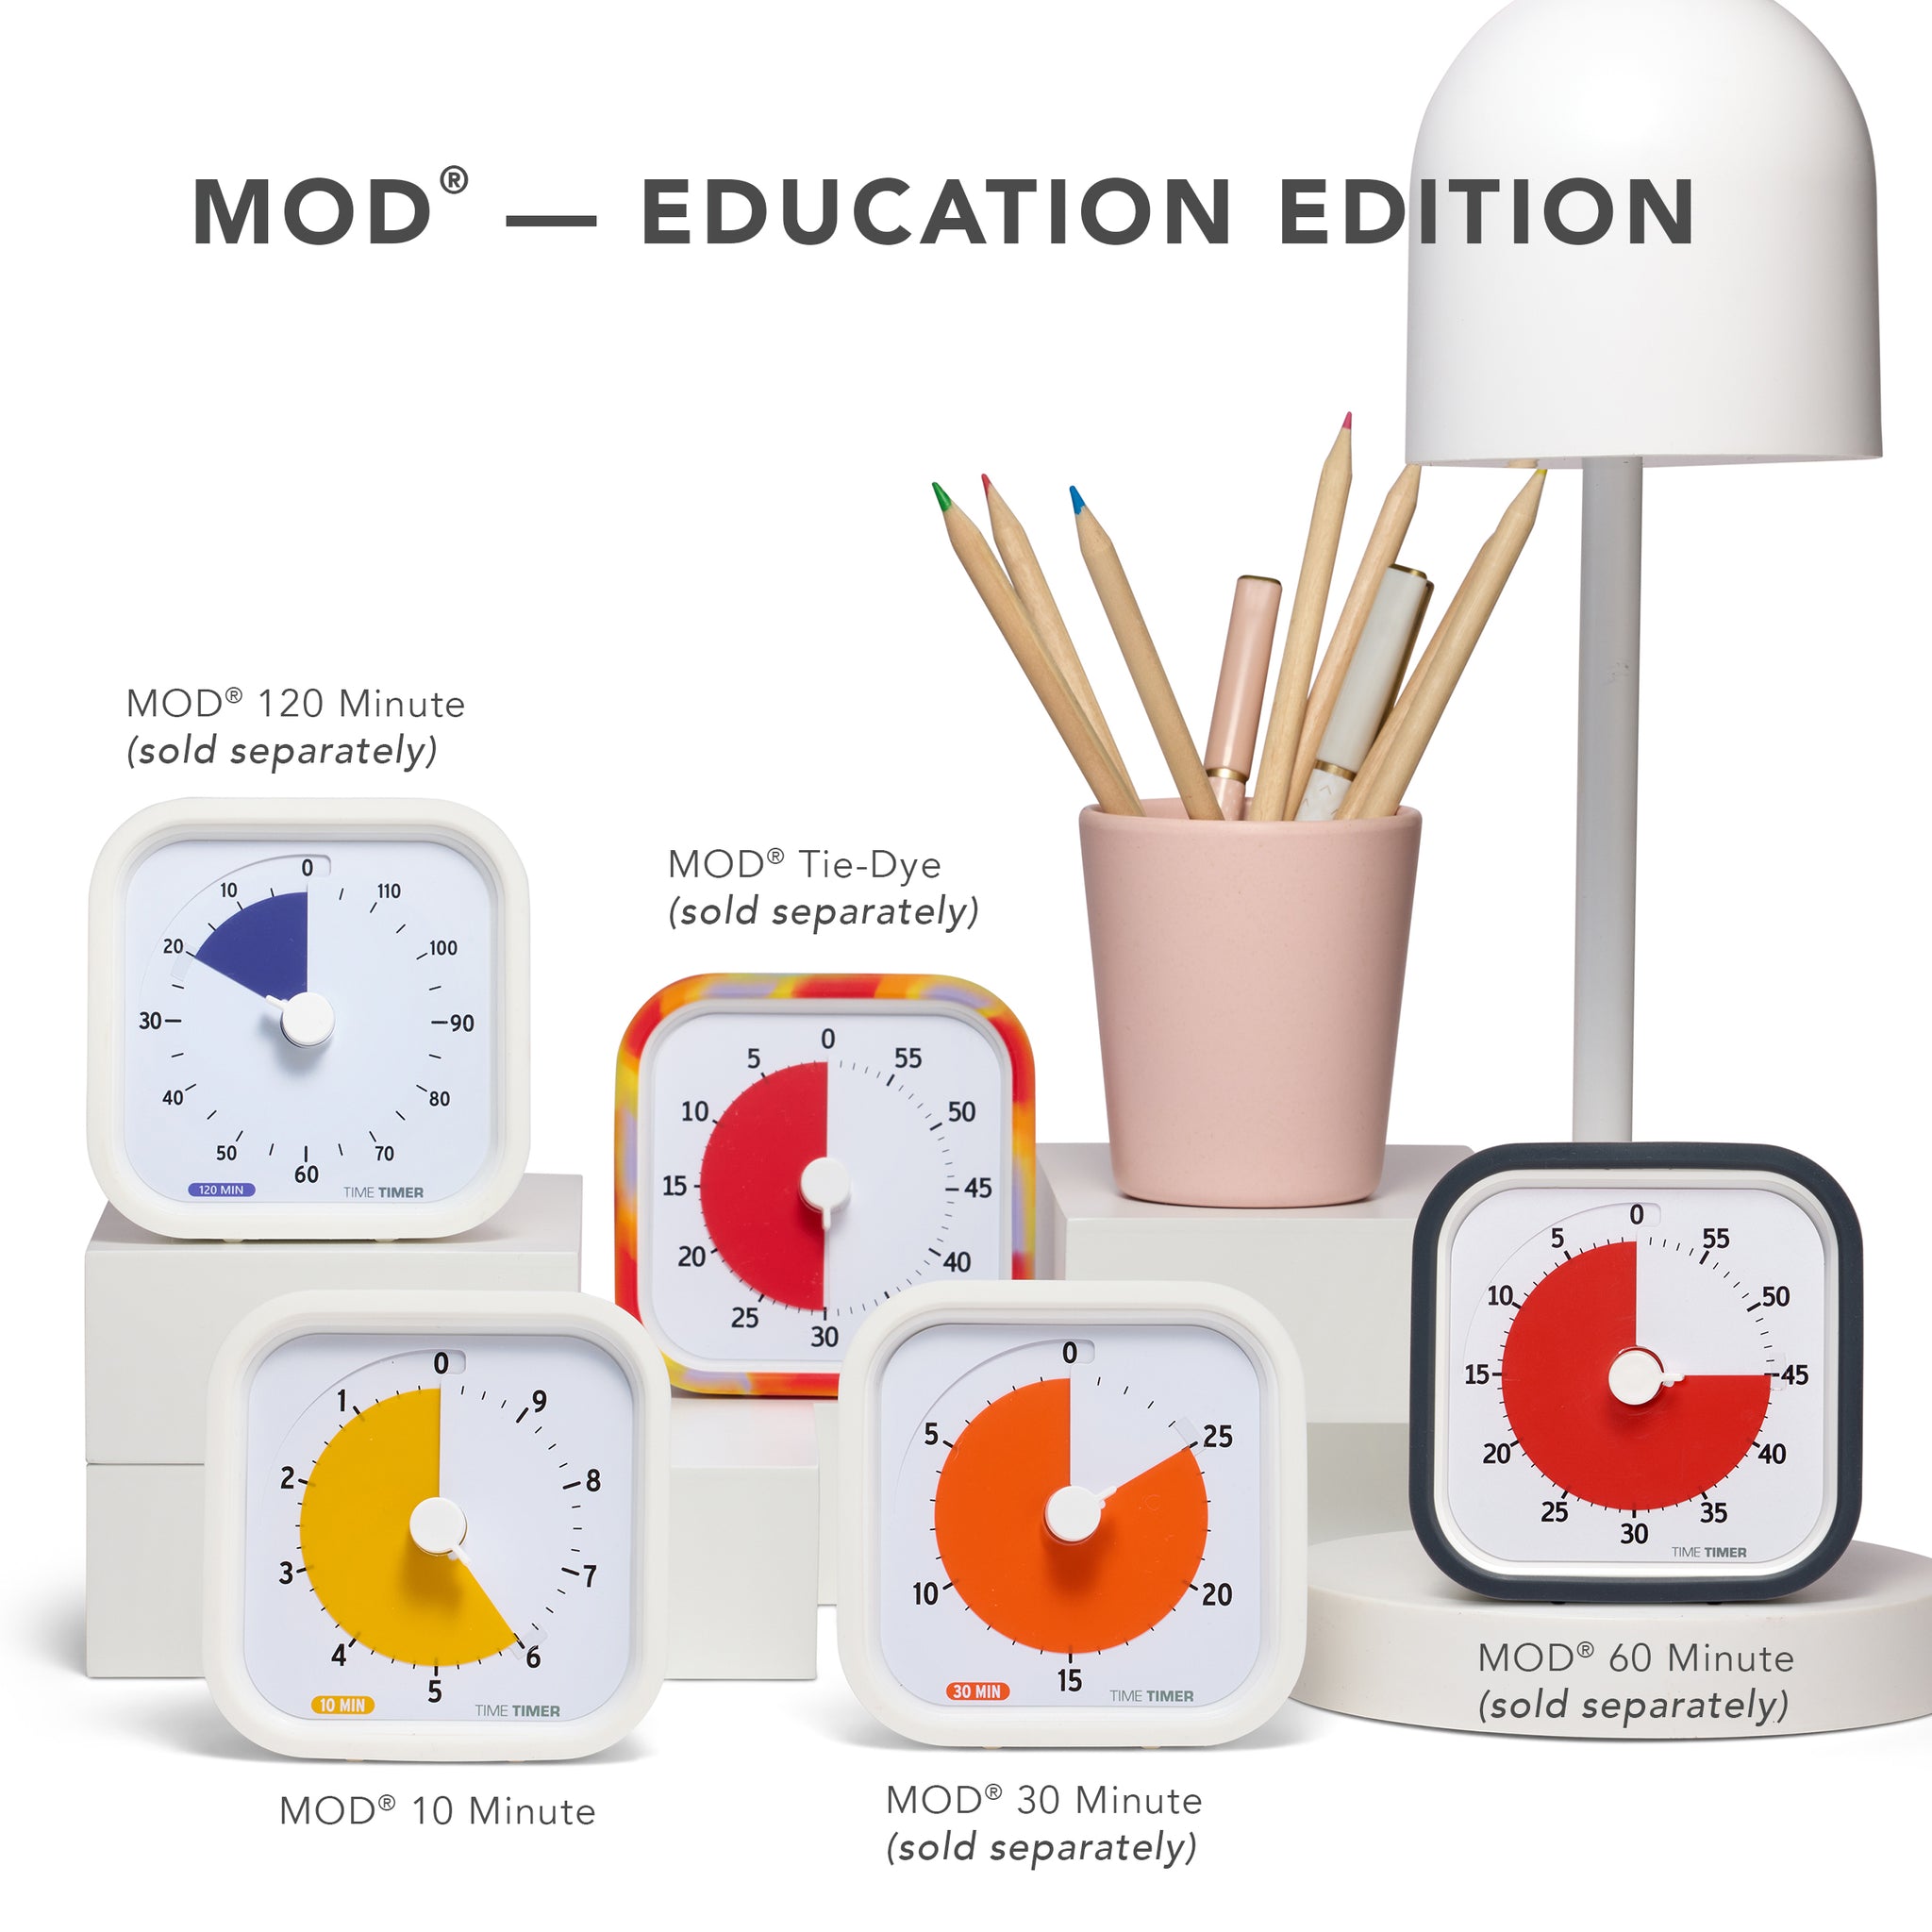 The MOD Education Edition Family is shown as five visual timers. The MOD 60-minute timer with a Charcoal silicone case. The MOD 60-minute timer with a tie-dye case, and the MOD 120-minute timer with a white silicone case and purple disk. The MOD 10 Minute with white exterior and yellow disk. And the MOD 30 Minute with white exterior and orange disk.